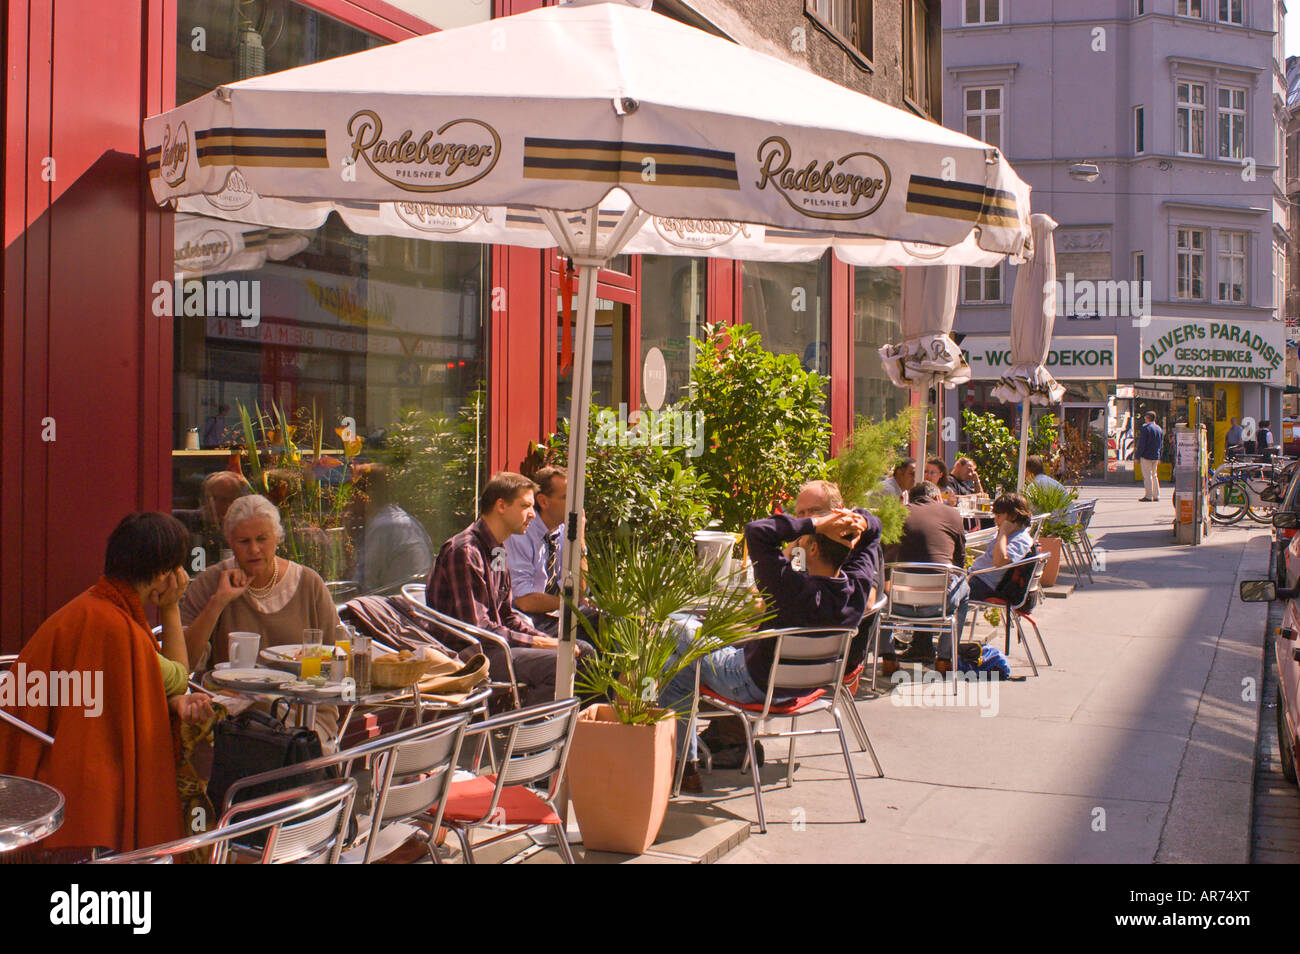 Vienne Autriche people relaxing at sidewalk cafe Banque D'Images